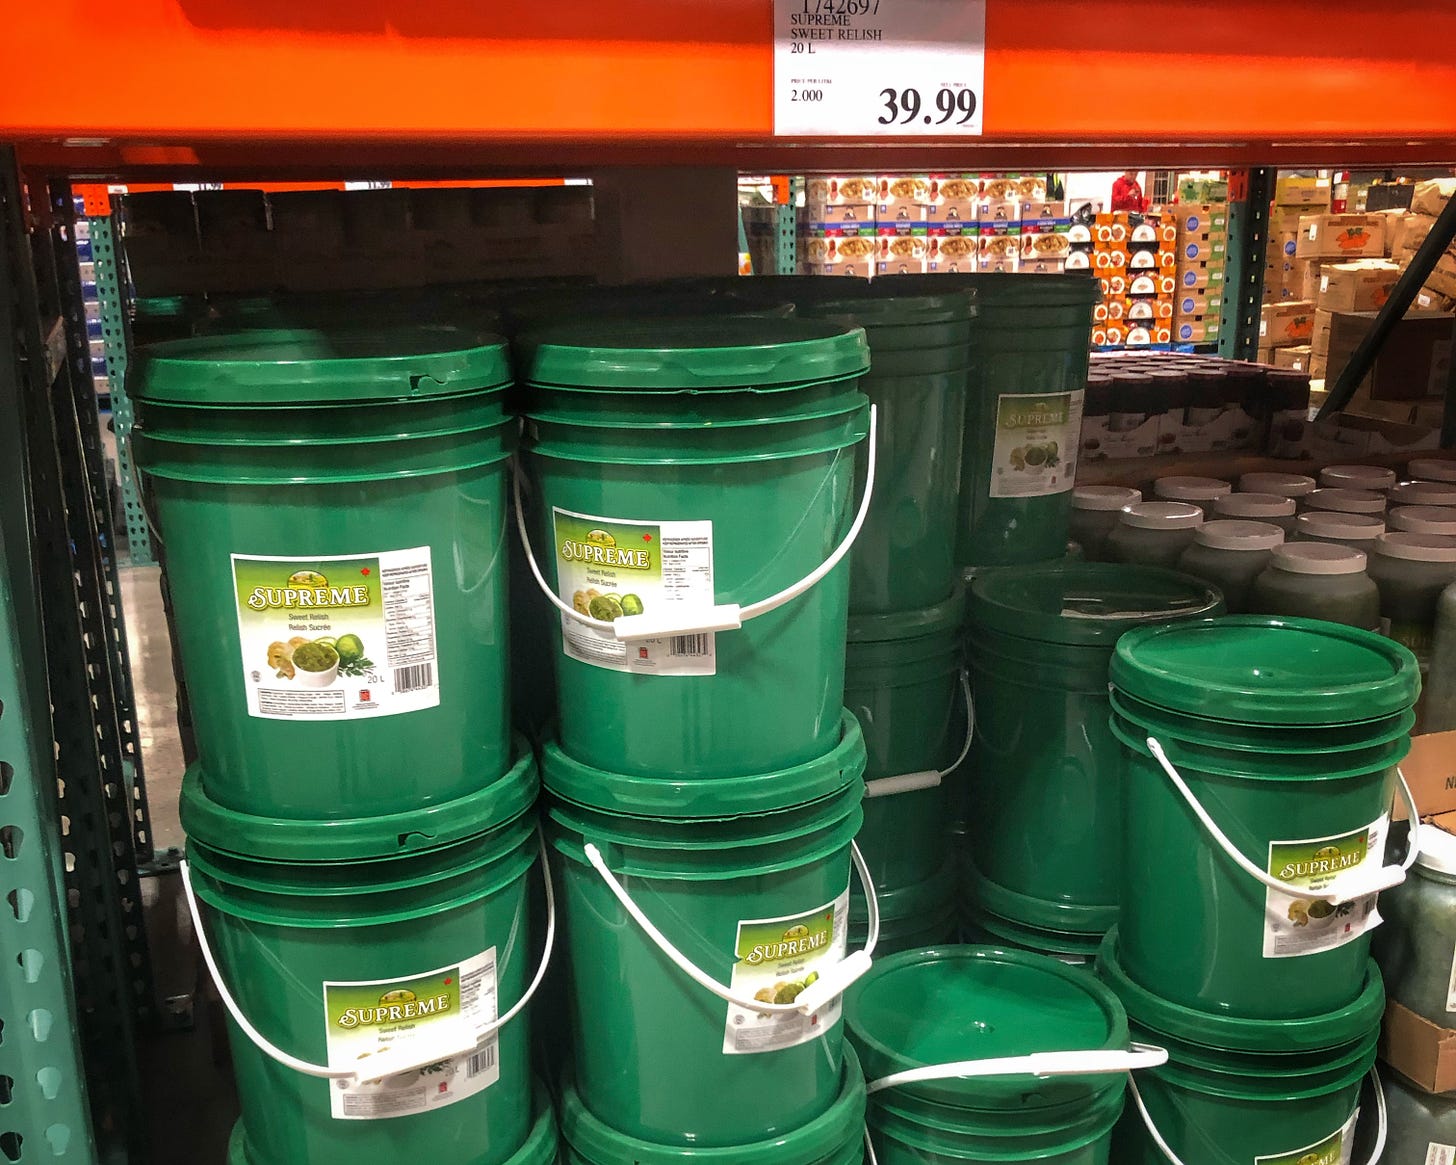 20-Litre buckets of Supreme Sweet Relish, priced at $39.99 at the Costco Business Centre